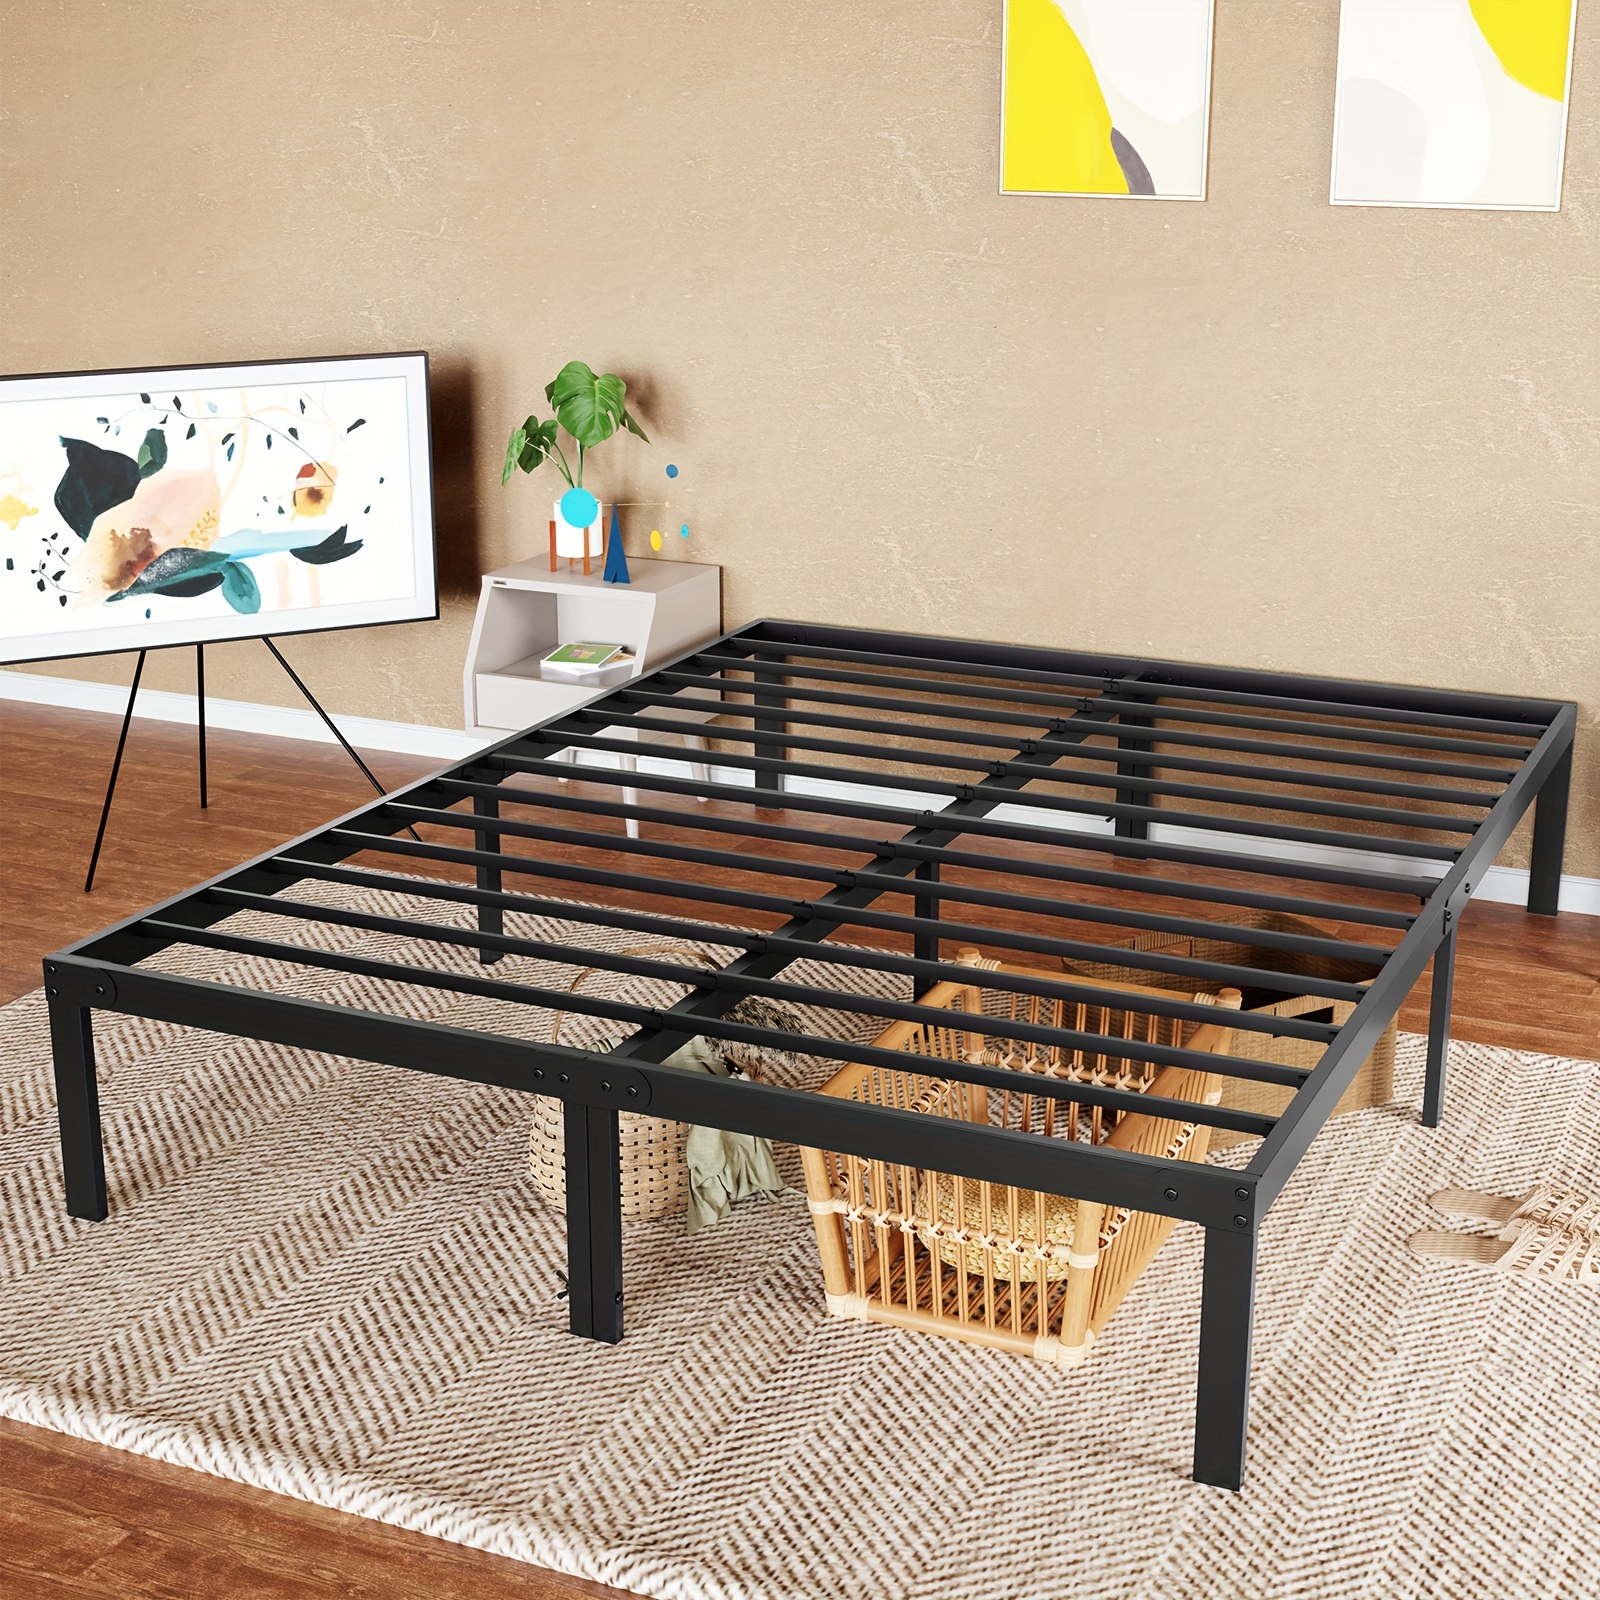 

14 Inch Bed Frame, Heavy Duty Platform Bed Frames With Under Bed Storage Space Easy Assembly, No Box Spring Needed, Sturdy Steel Slat Support